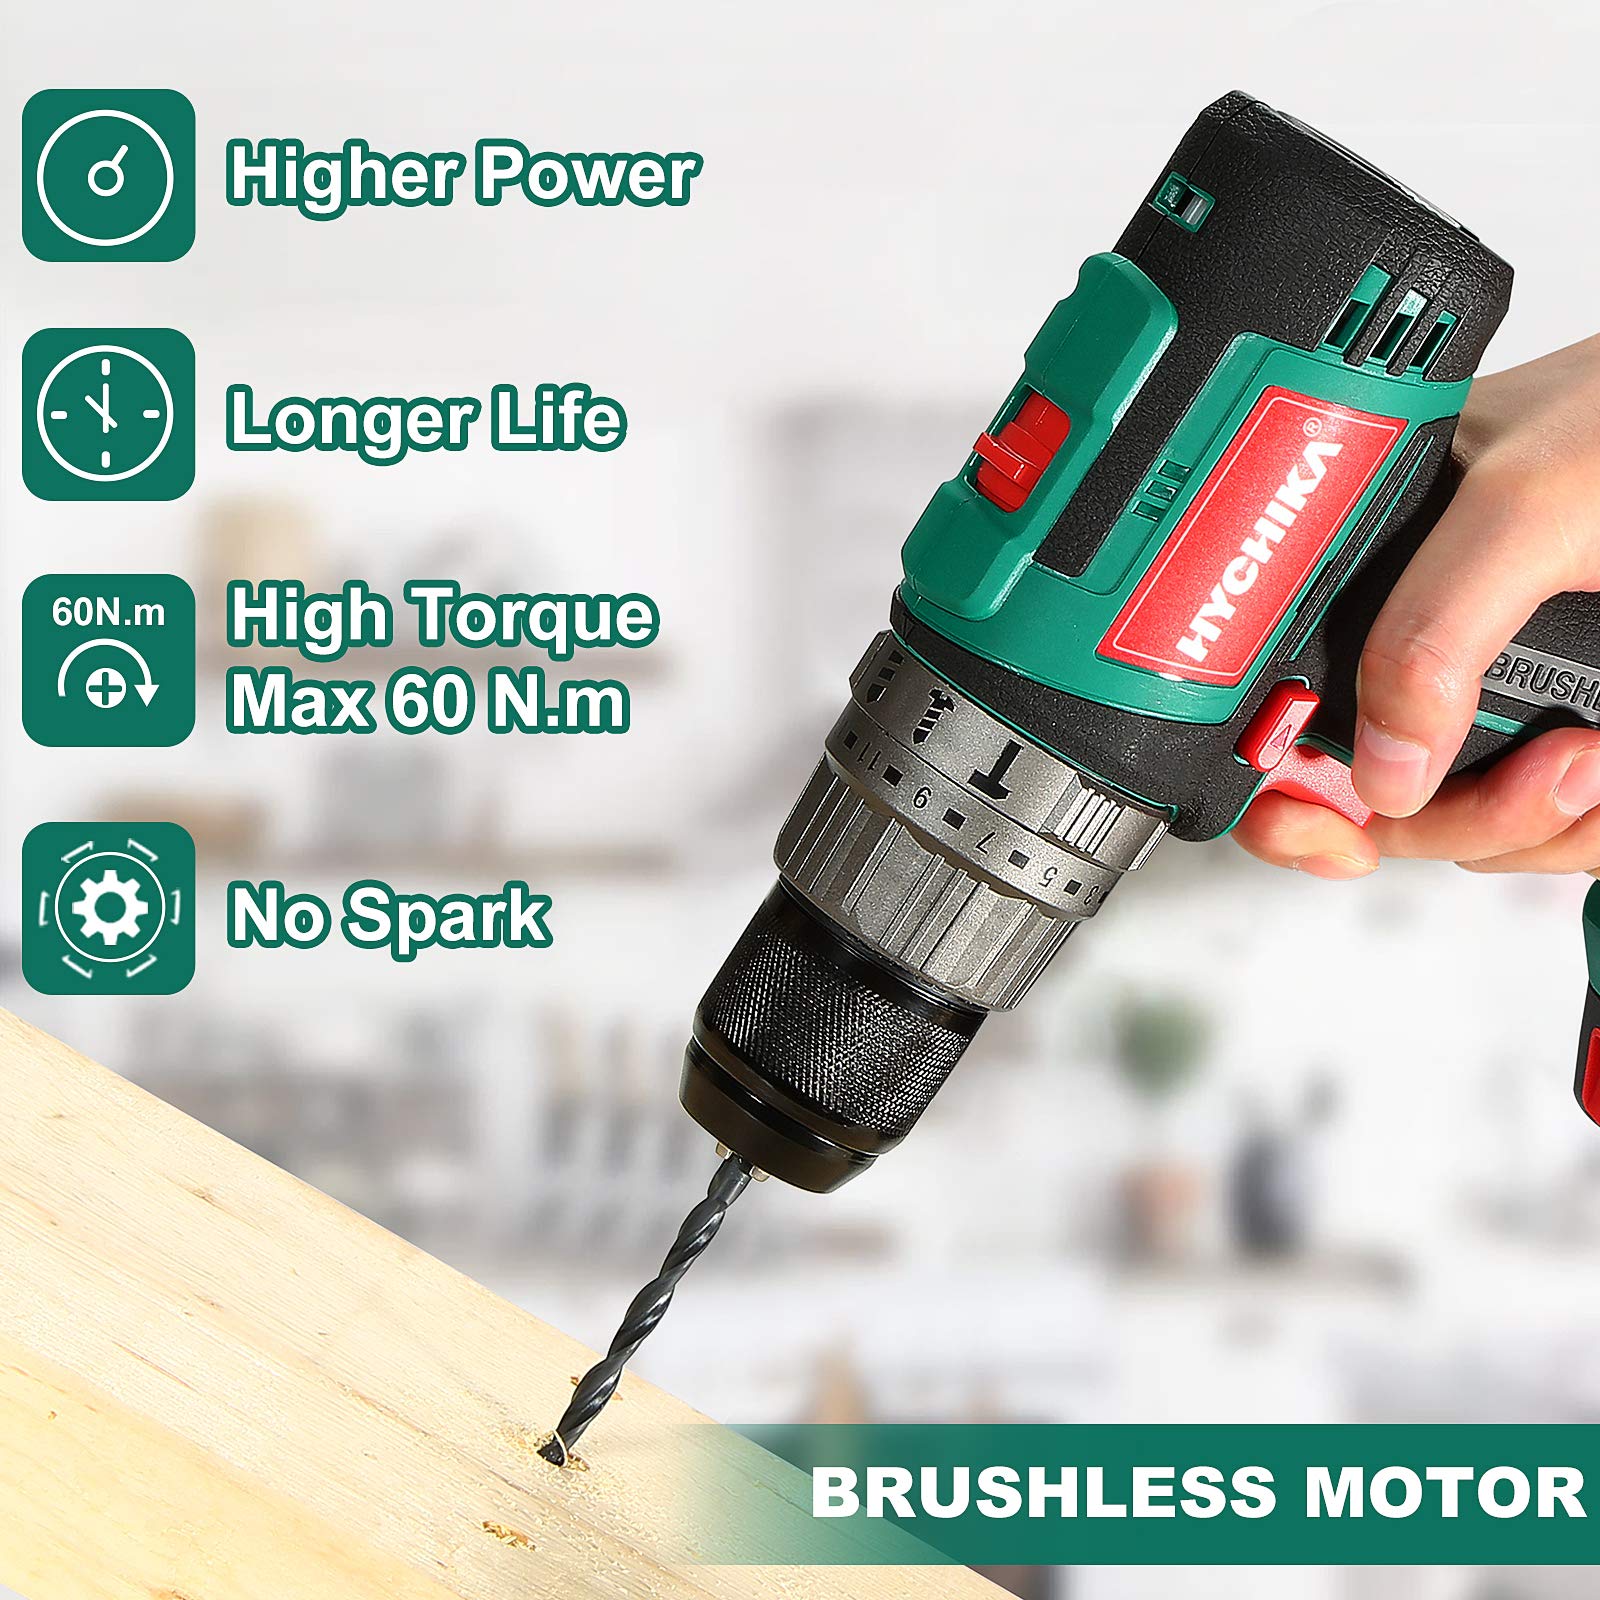 Cordless Drill 20V Max, HYCHIKA Brushless Drill Max Torque 530 In-lbs, 2.0 AH Battery 1H Fast Charger, 21+3 Torque Setting 1/2